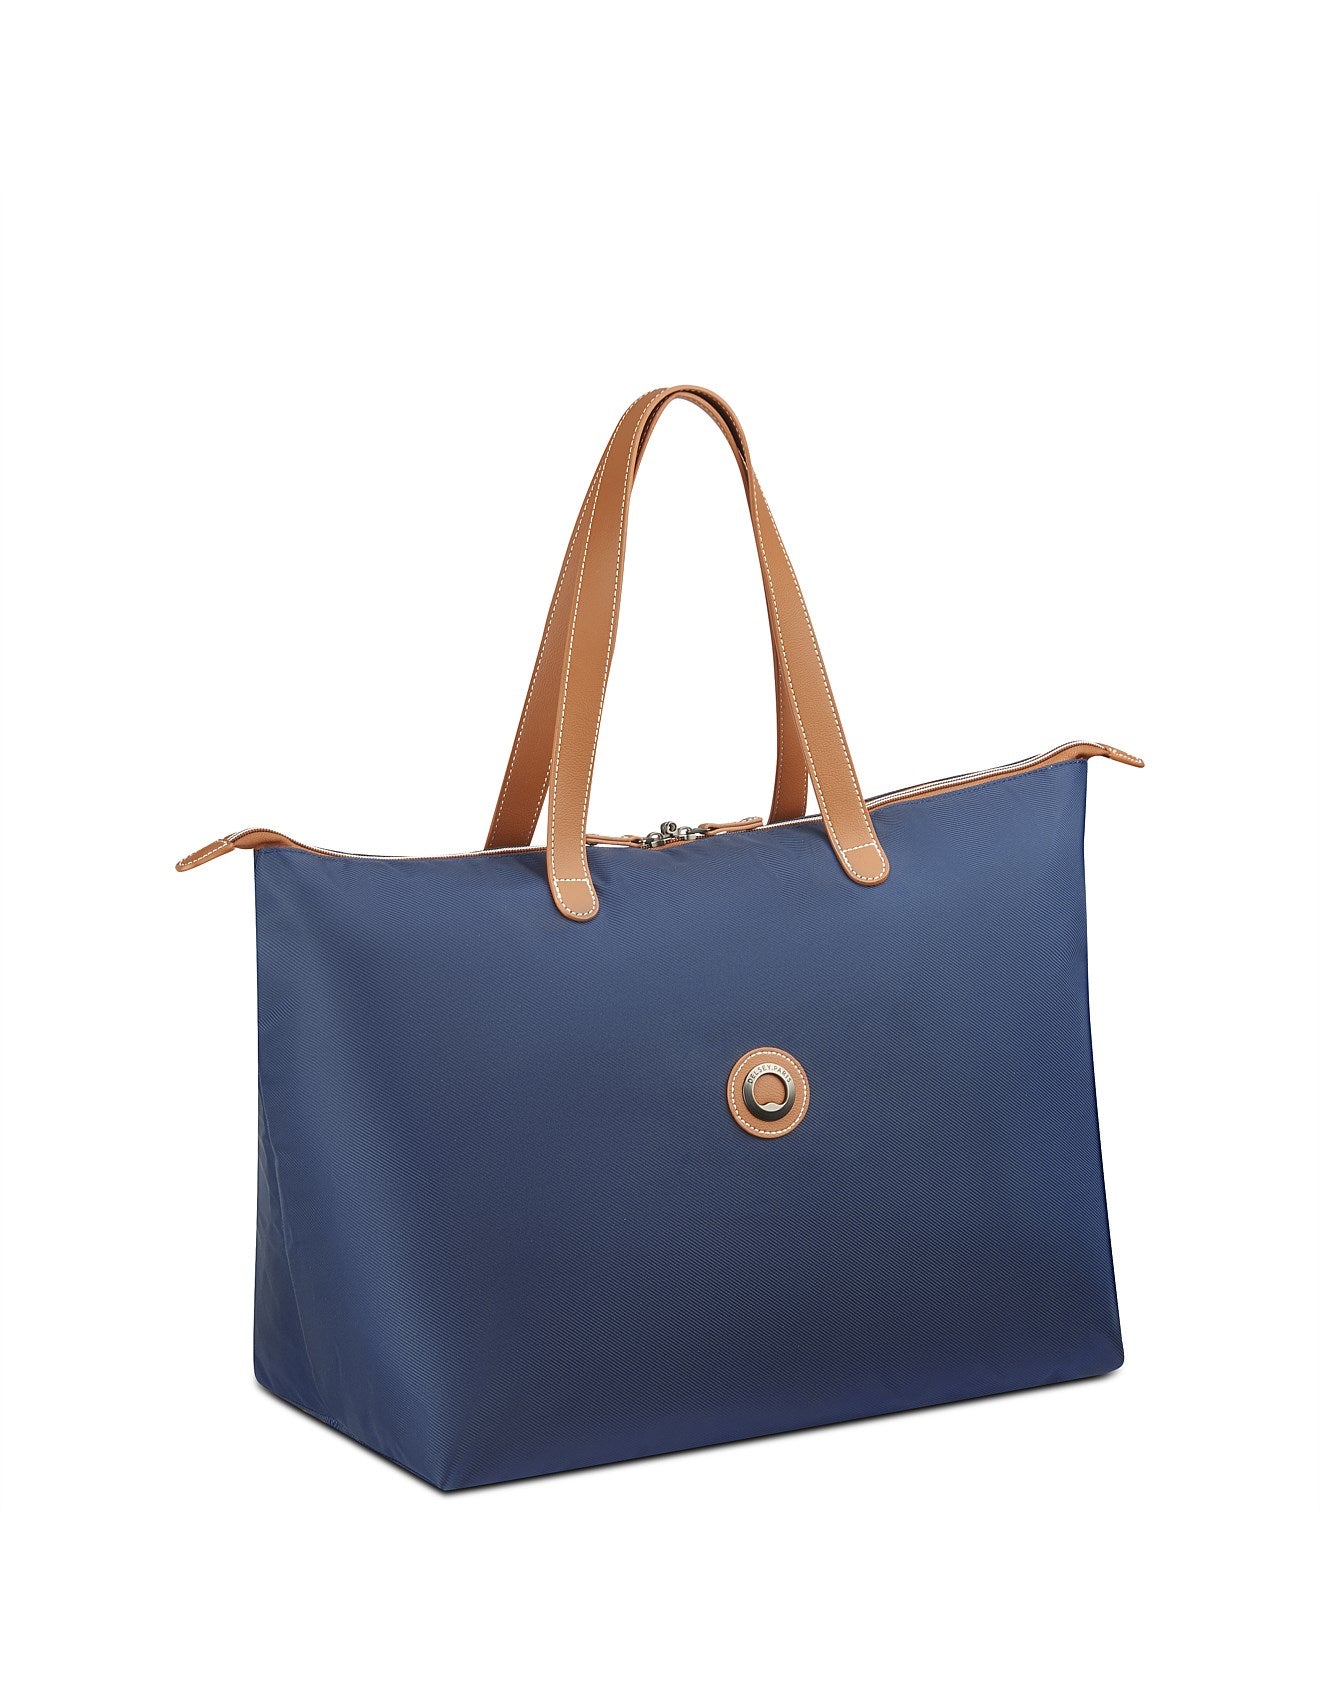 DELSEY CHATELET AIR 2.0 TOTE BAG NAVY BLUE